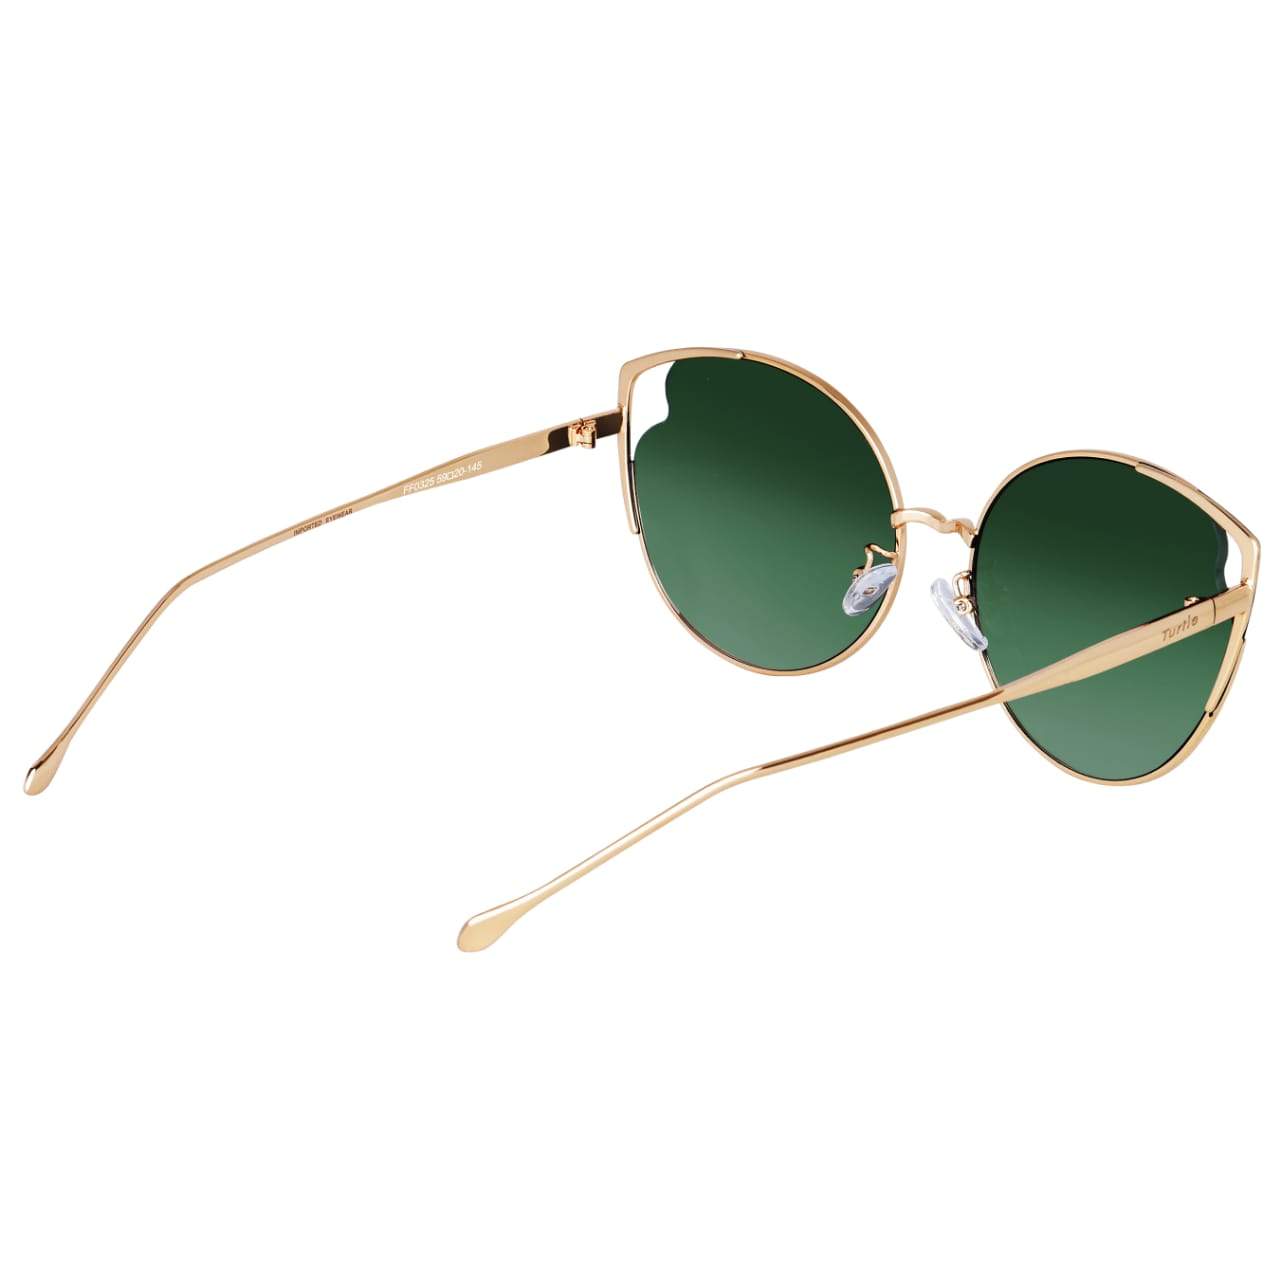 New Cat Eye Green Gradient Sunglasses For Women-Unique and Classy